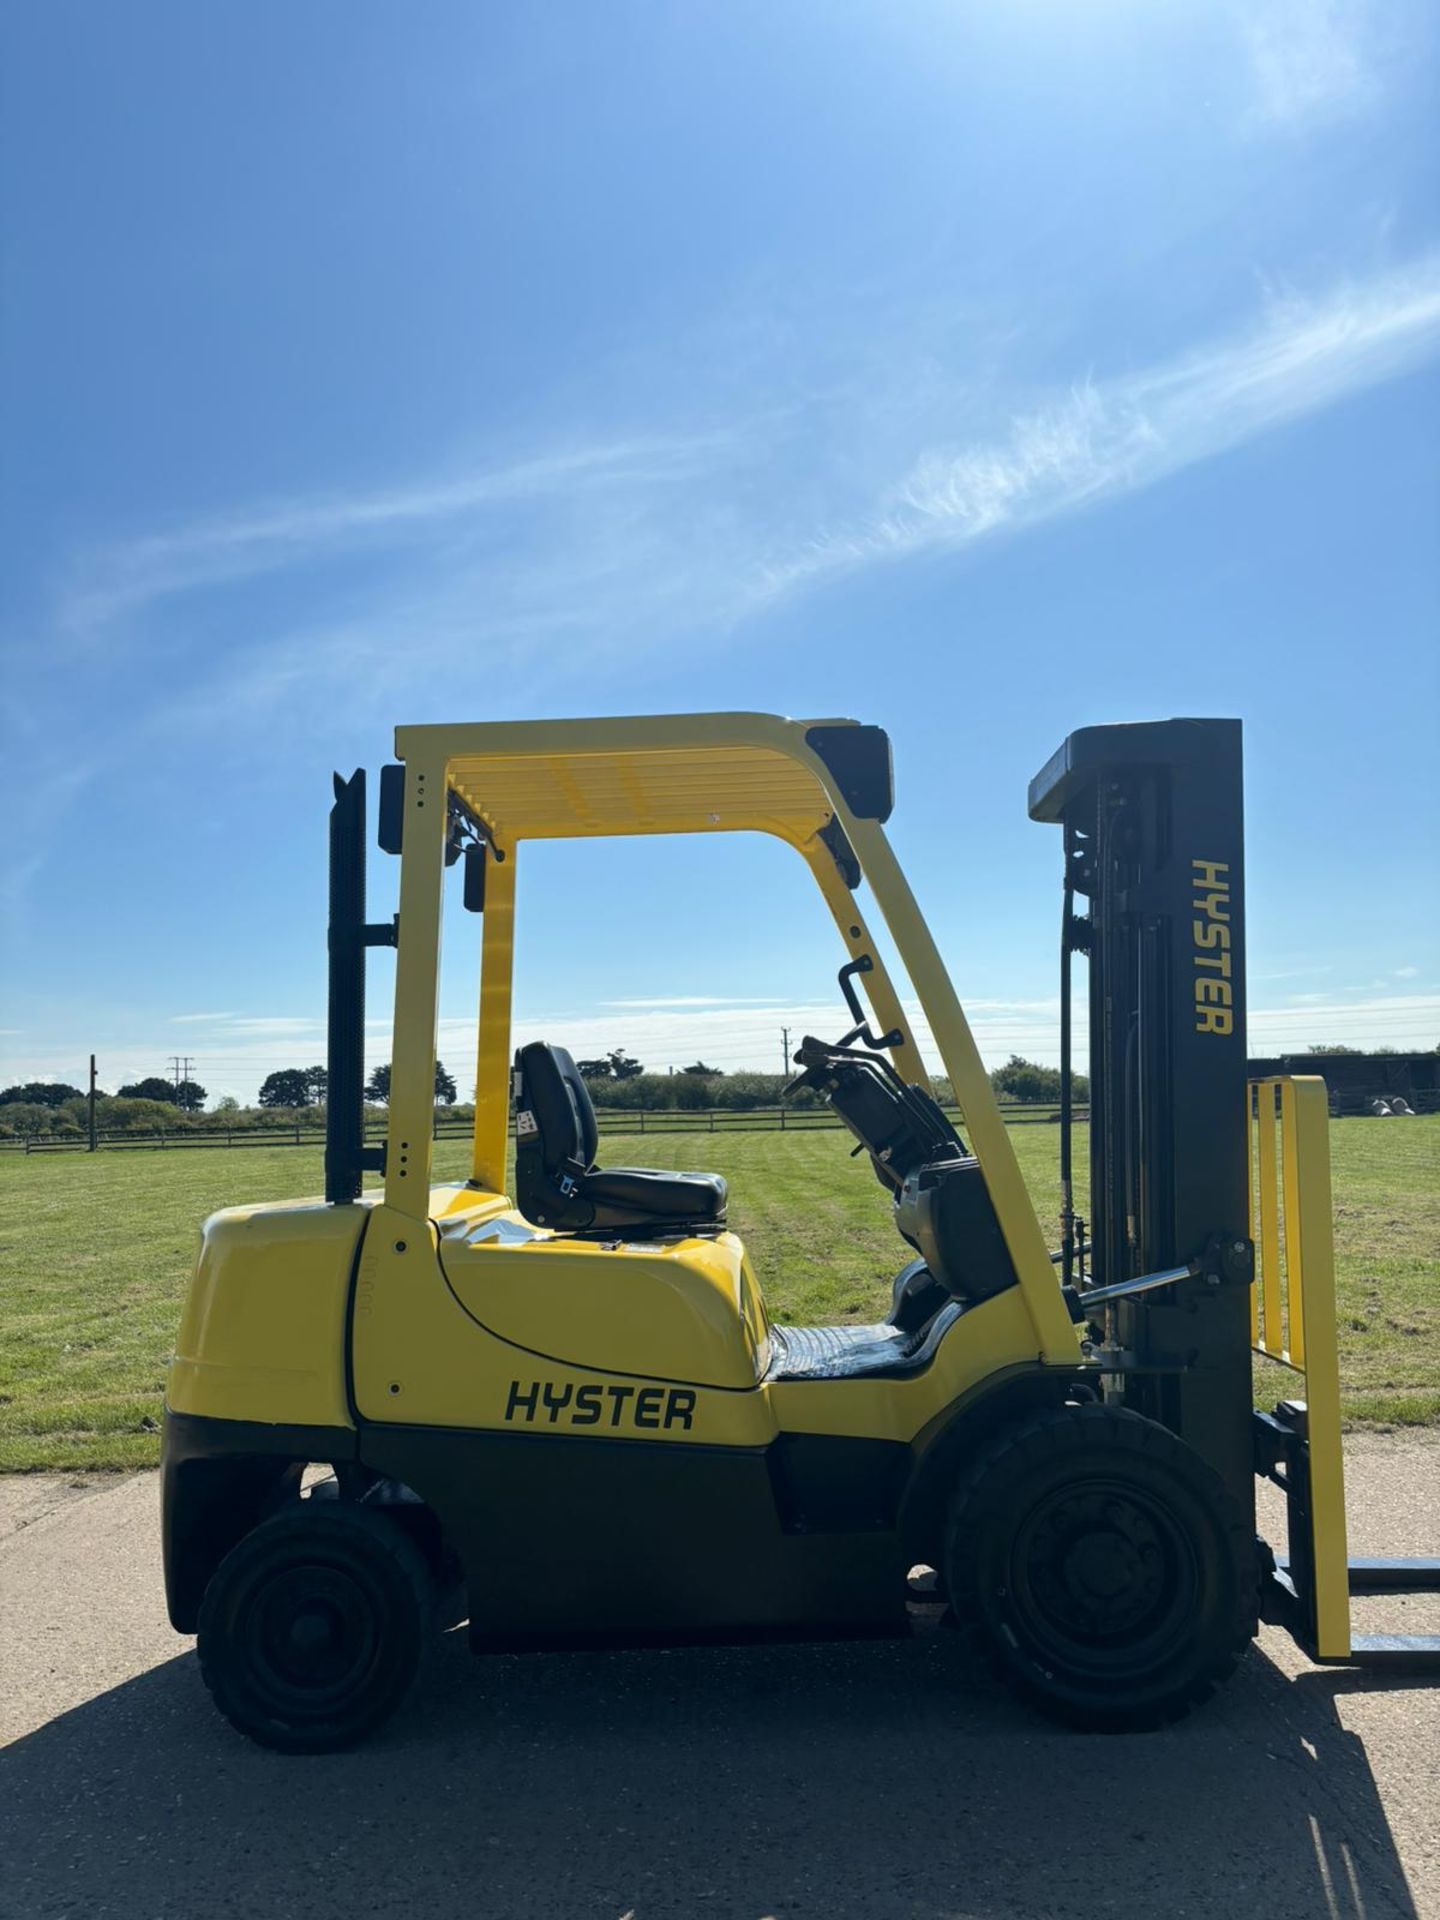 2018, HYSTER - Forklift Truck - Image 9 of 9